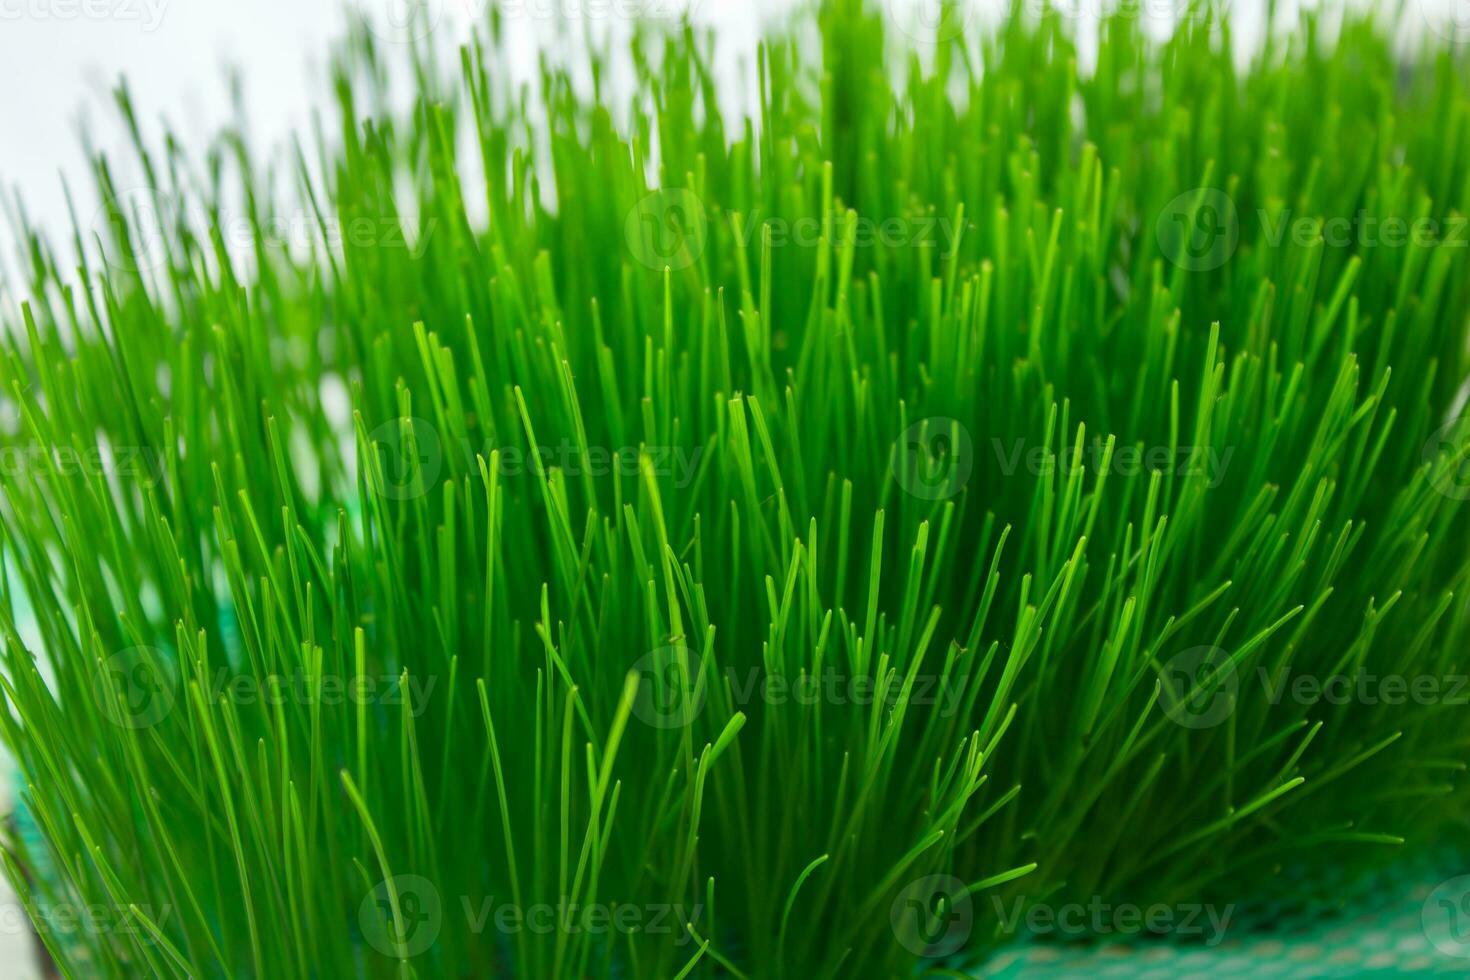 Closeup photo of cat grass, healthy food for cats.